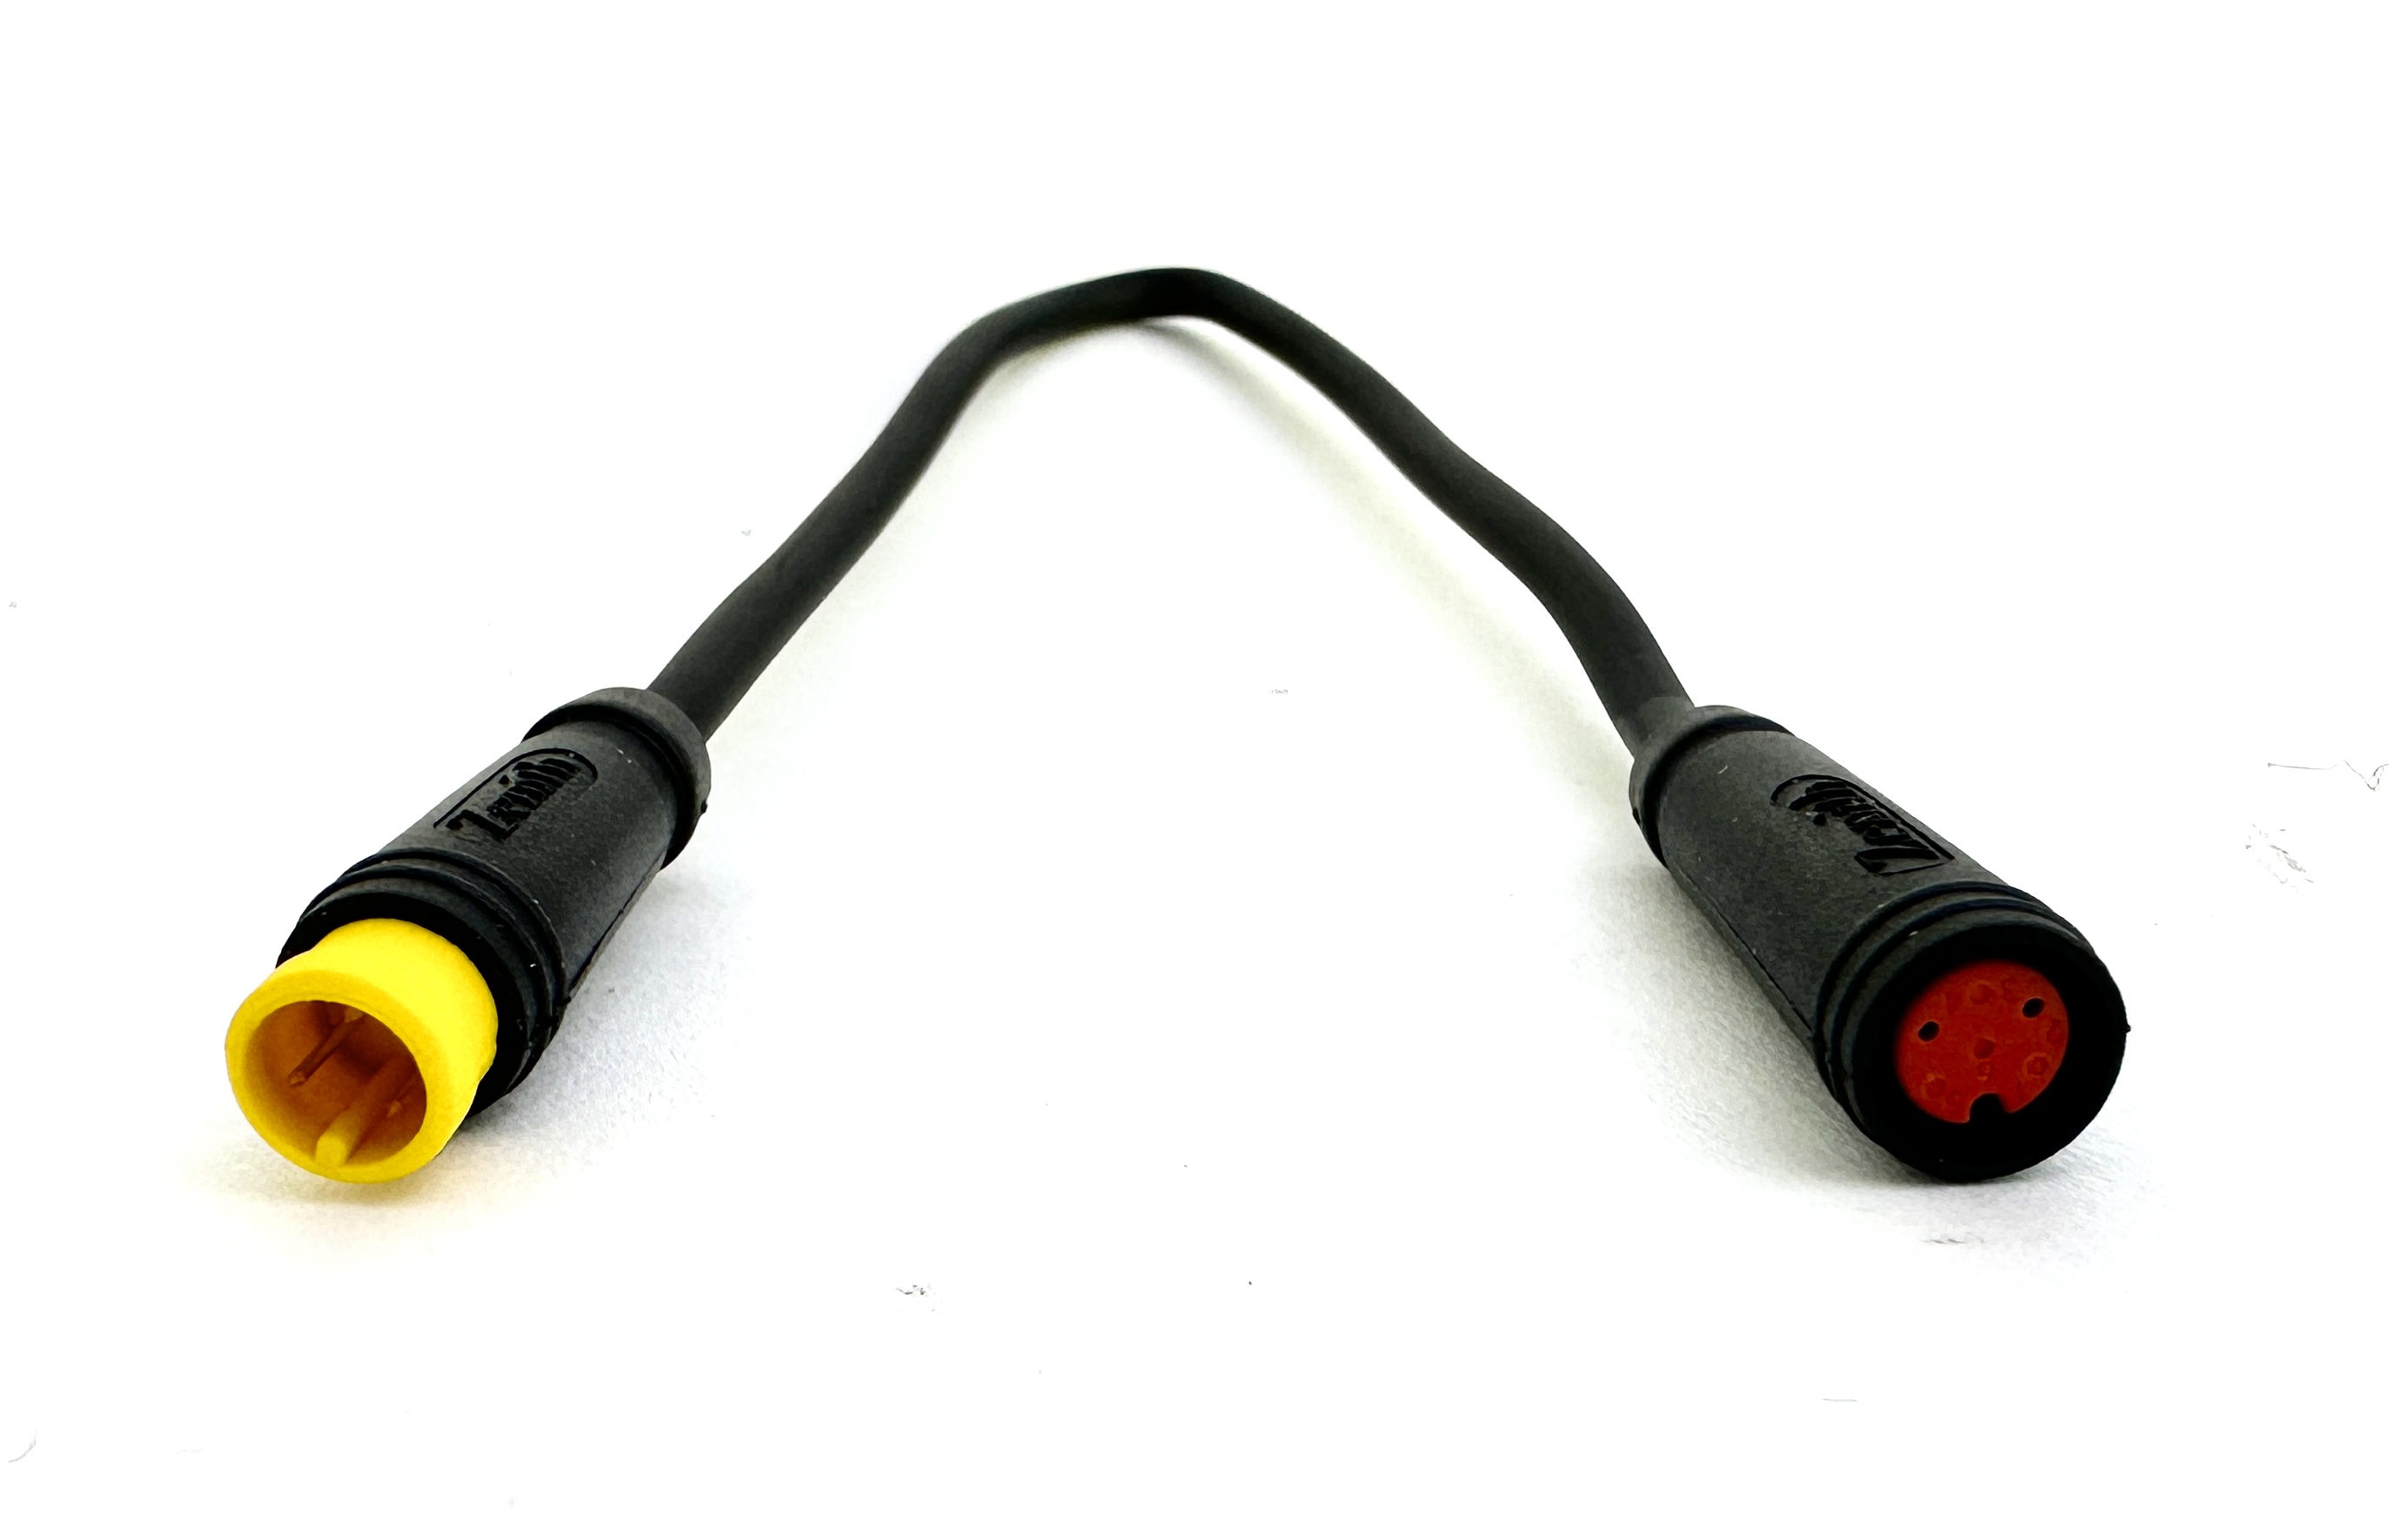 HIGO / Julet adapter cable 19,5 cm for ebike, 2 PIN red to 3 PIN yellow